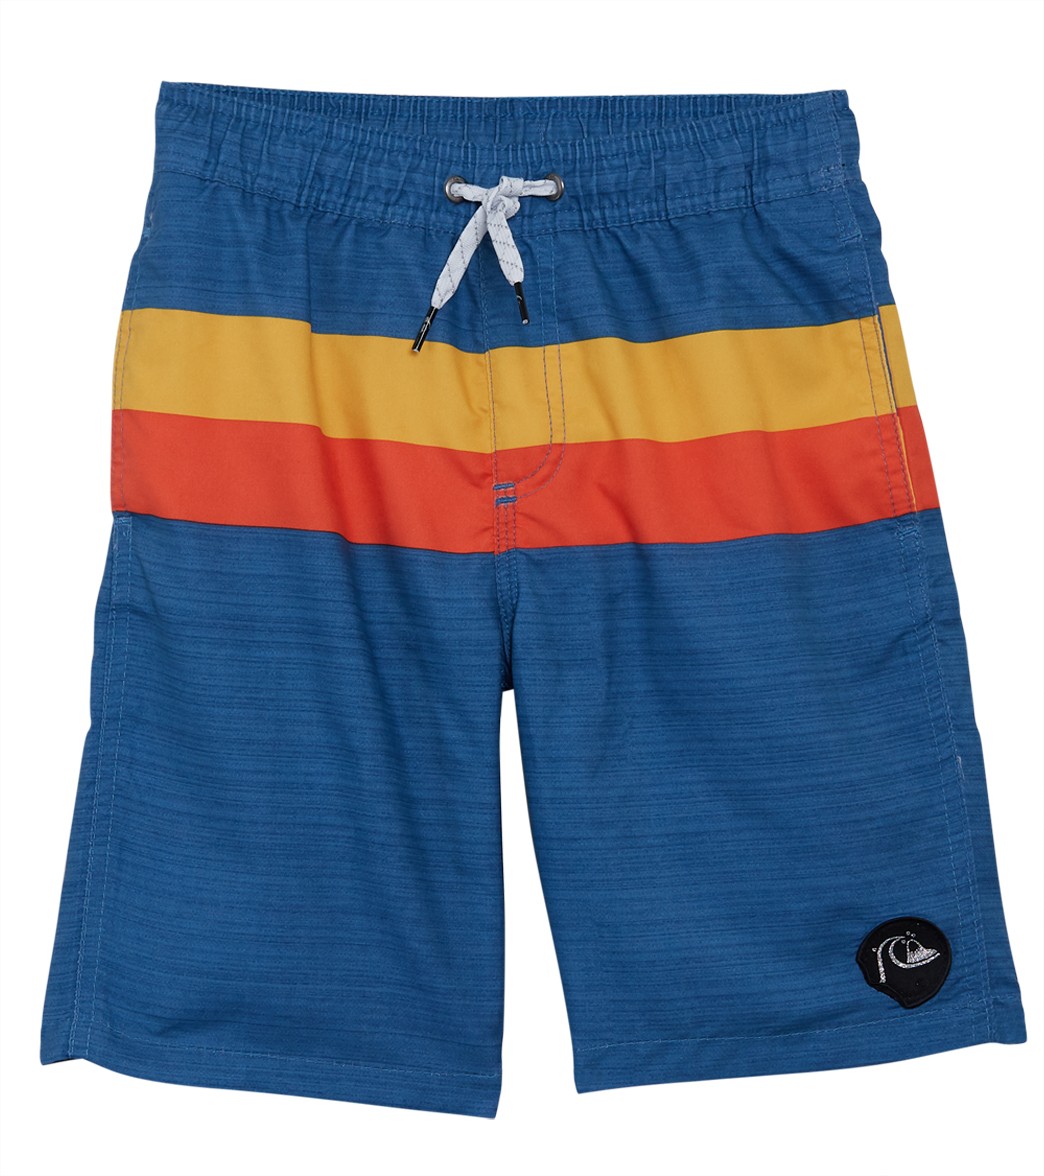 Quiksilver Boys' Mystery Bus 14 Volley Shorts Toddler - Stellar Sm 5 Size Small/Medium Polyester - Swimoutlet.com